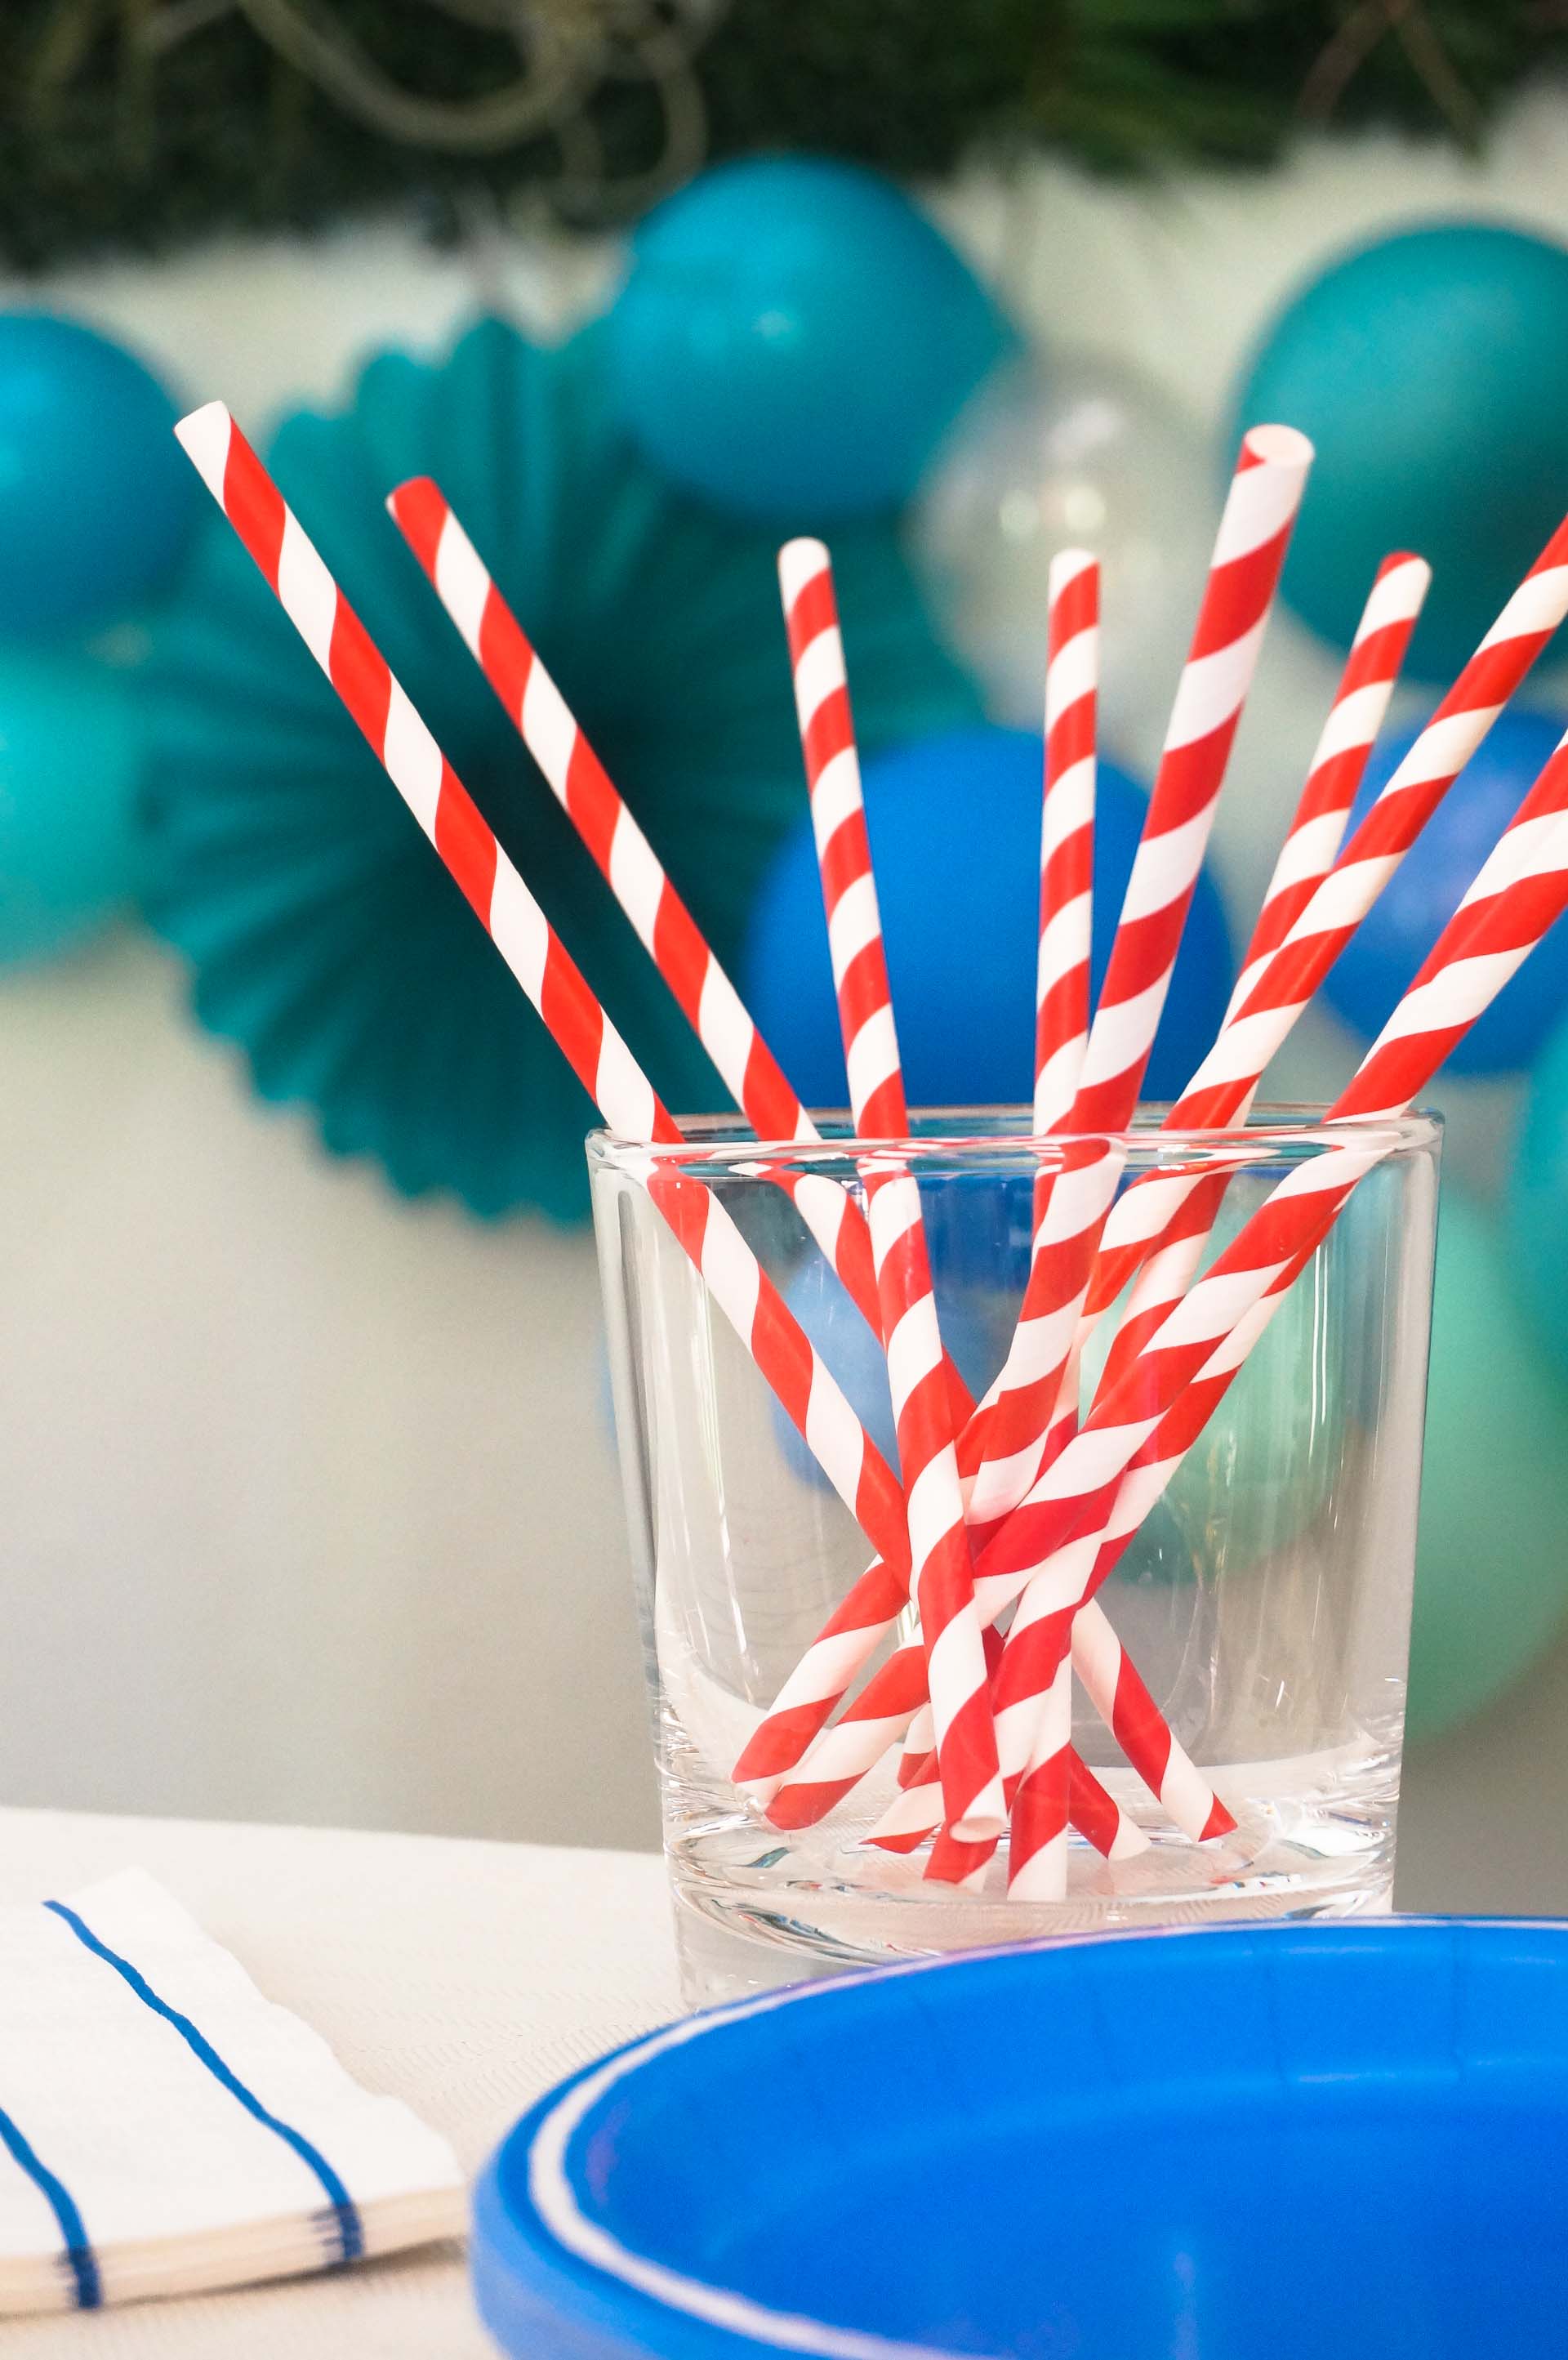 Red and white party straws